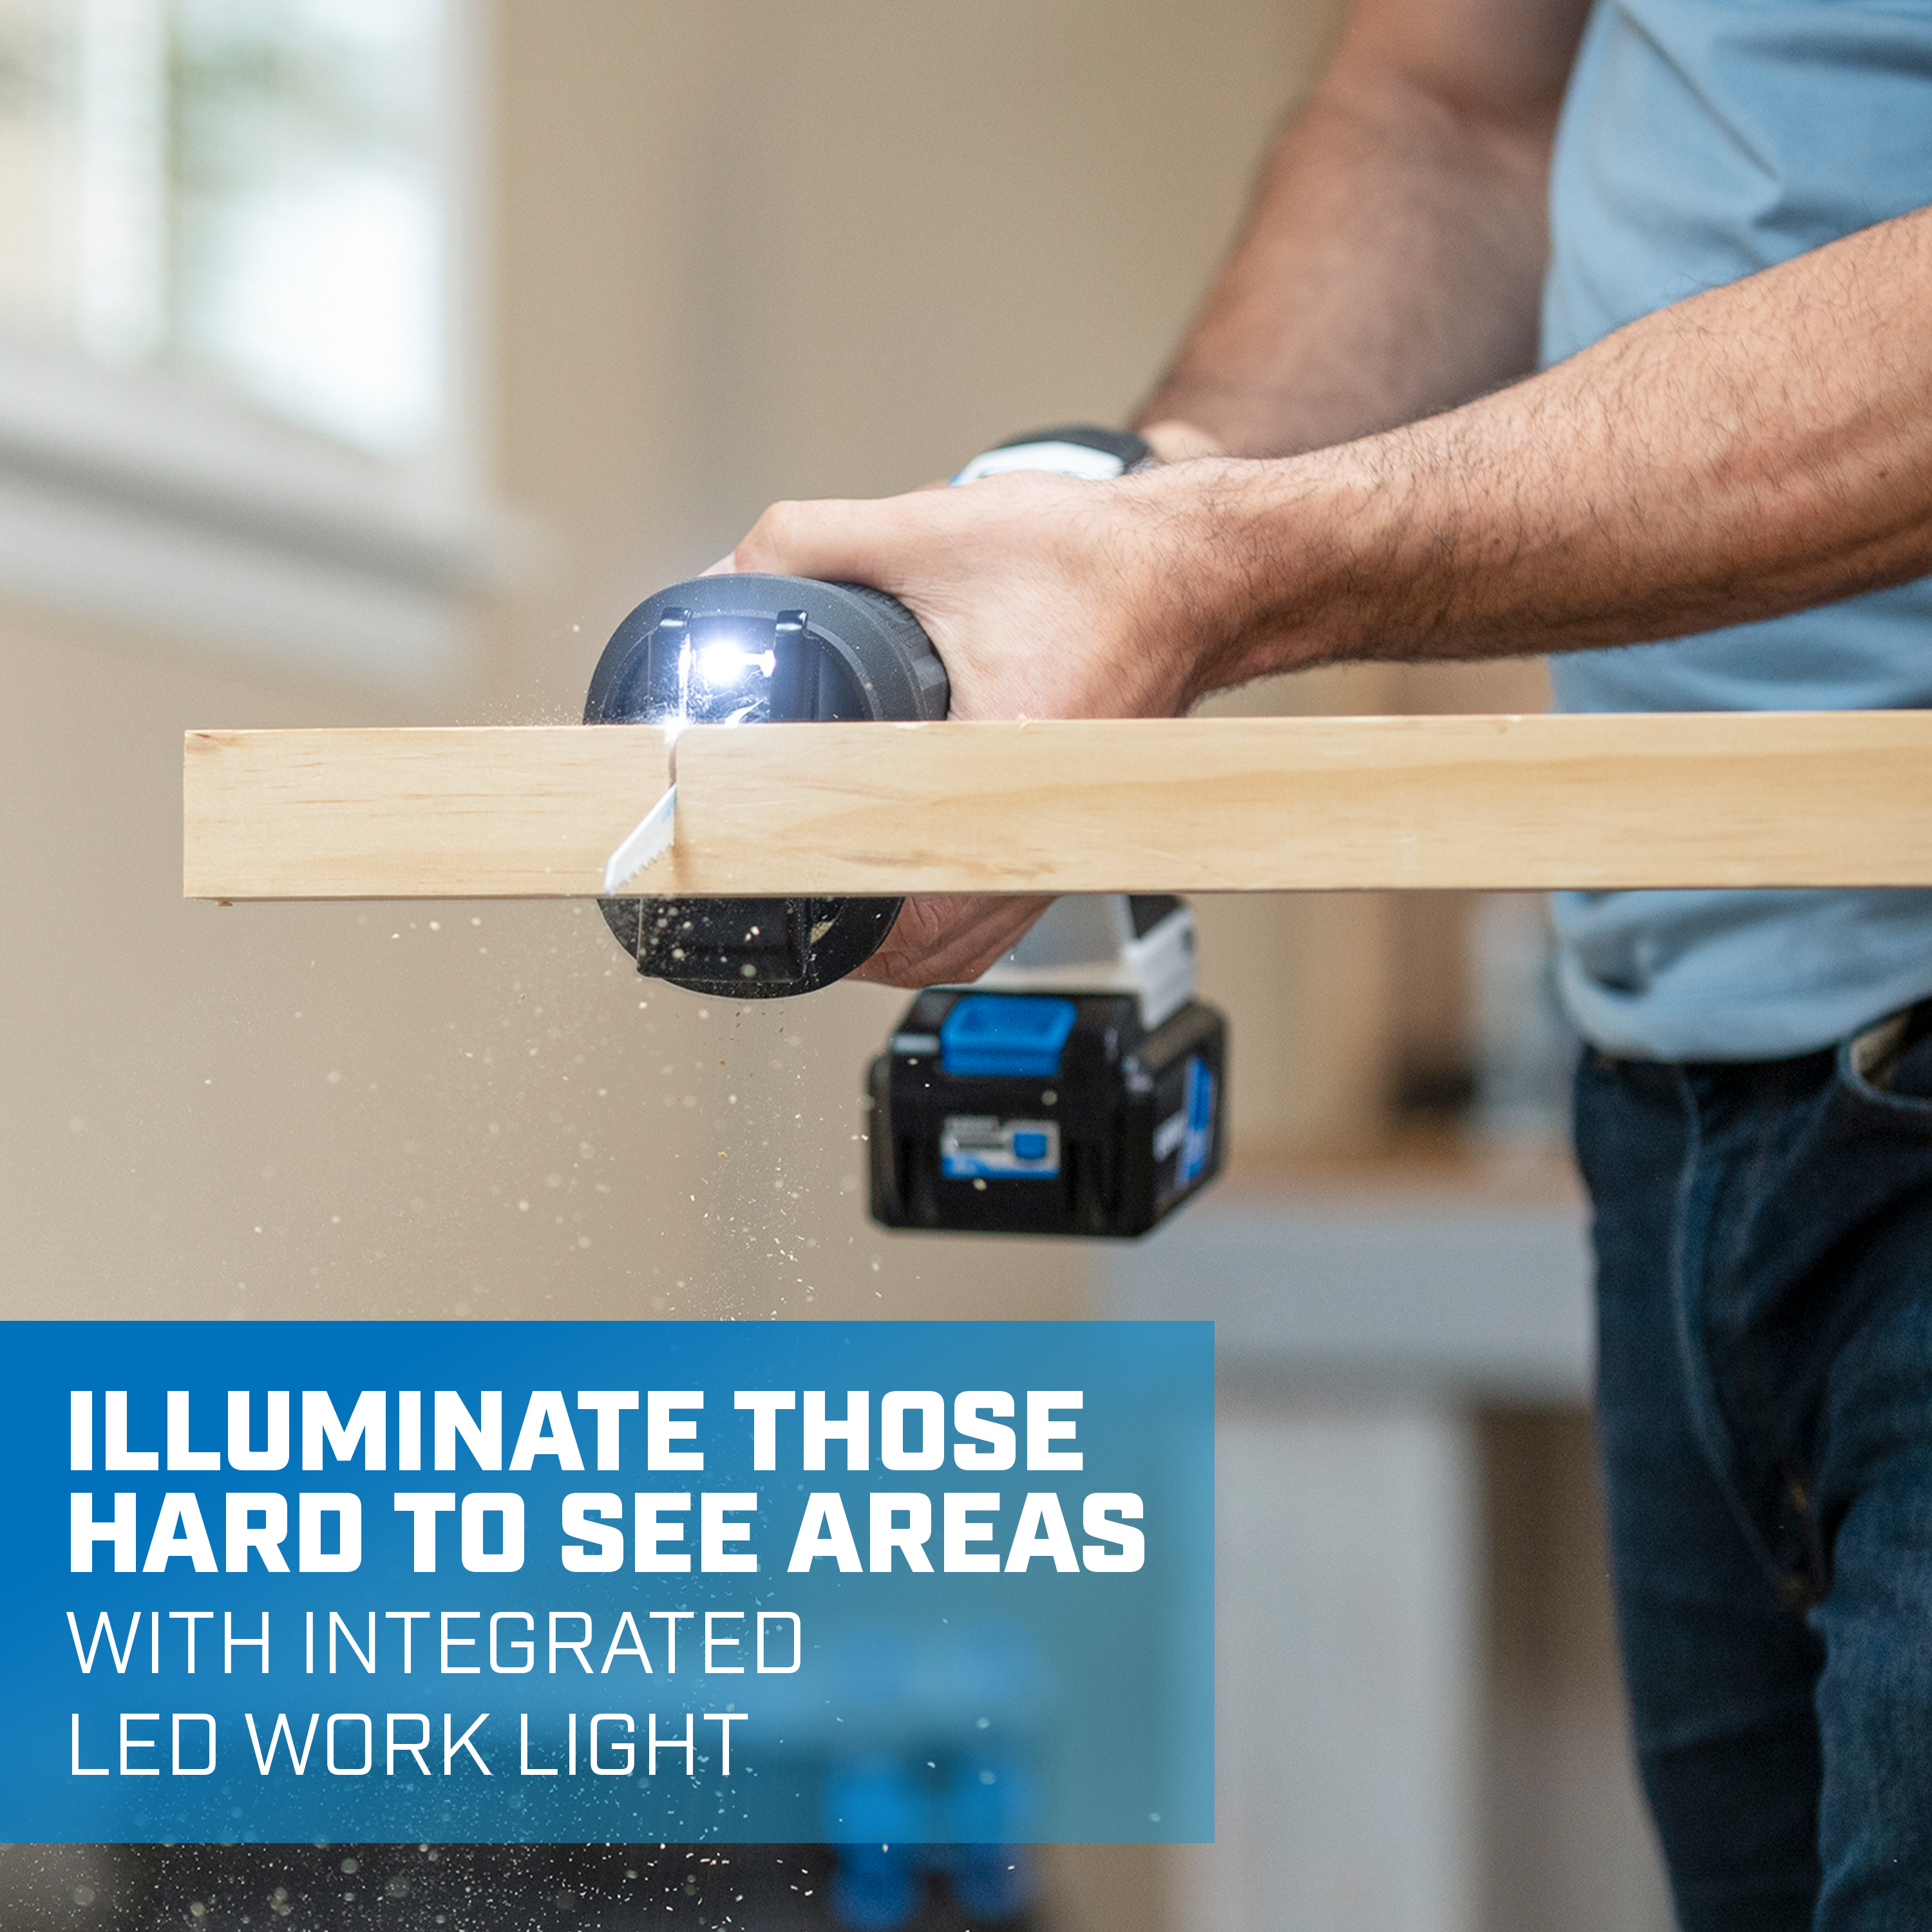 illuminate those hard to see areas with integrated LED work light